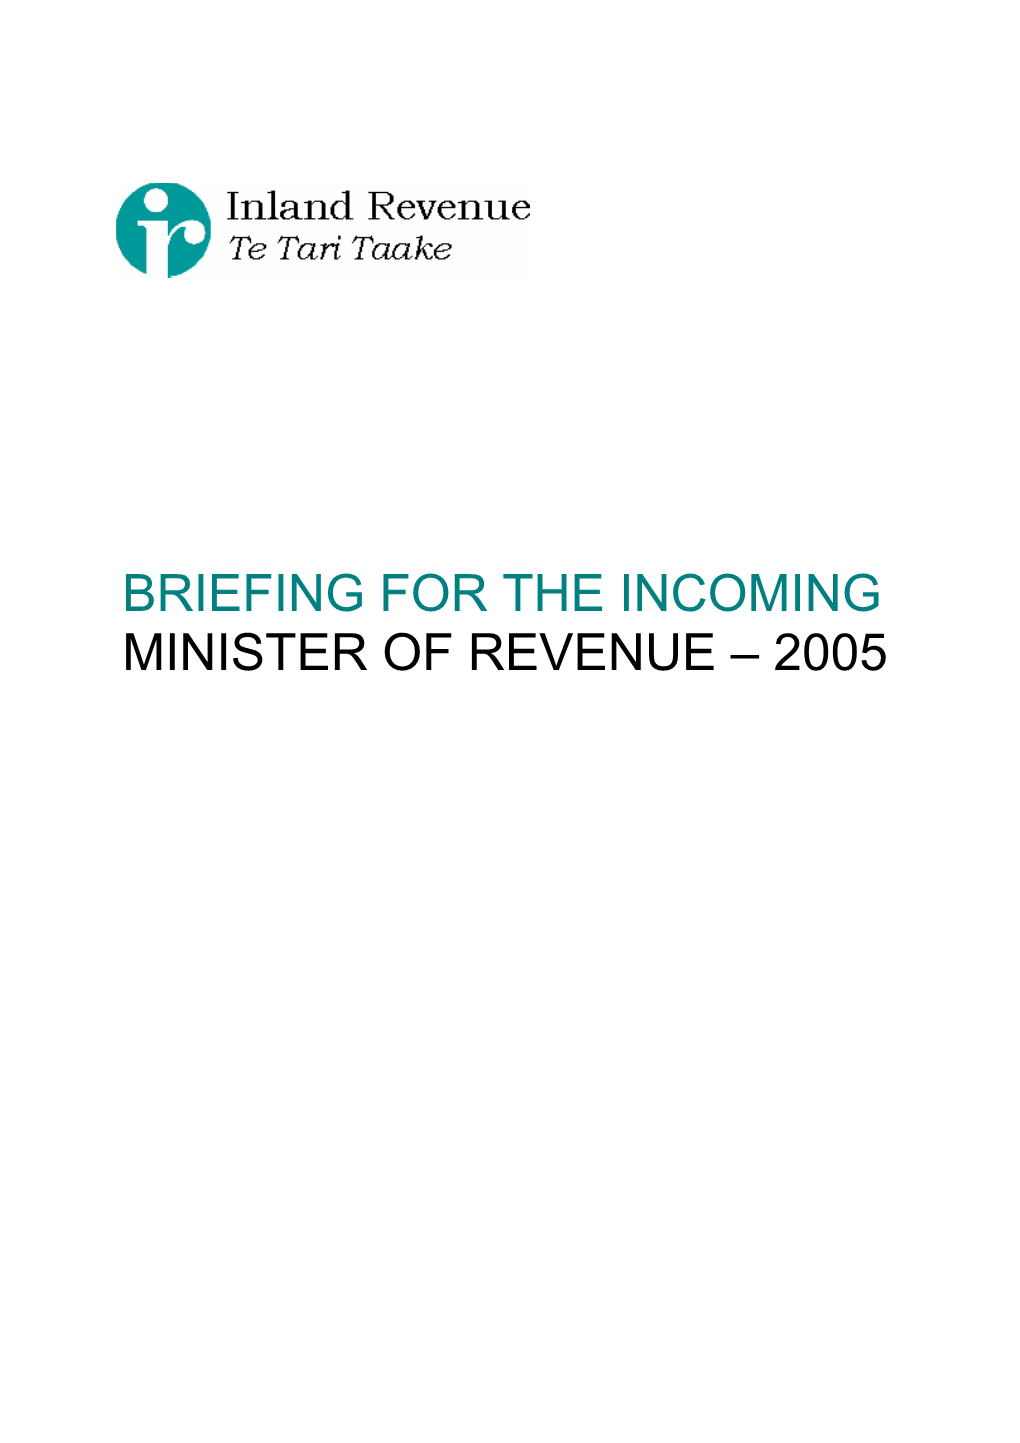 Briefing for the Incoming Minister of Revenue 2005